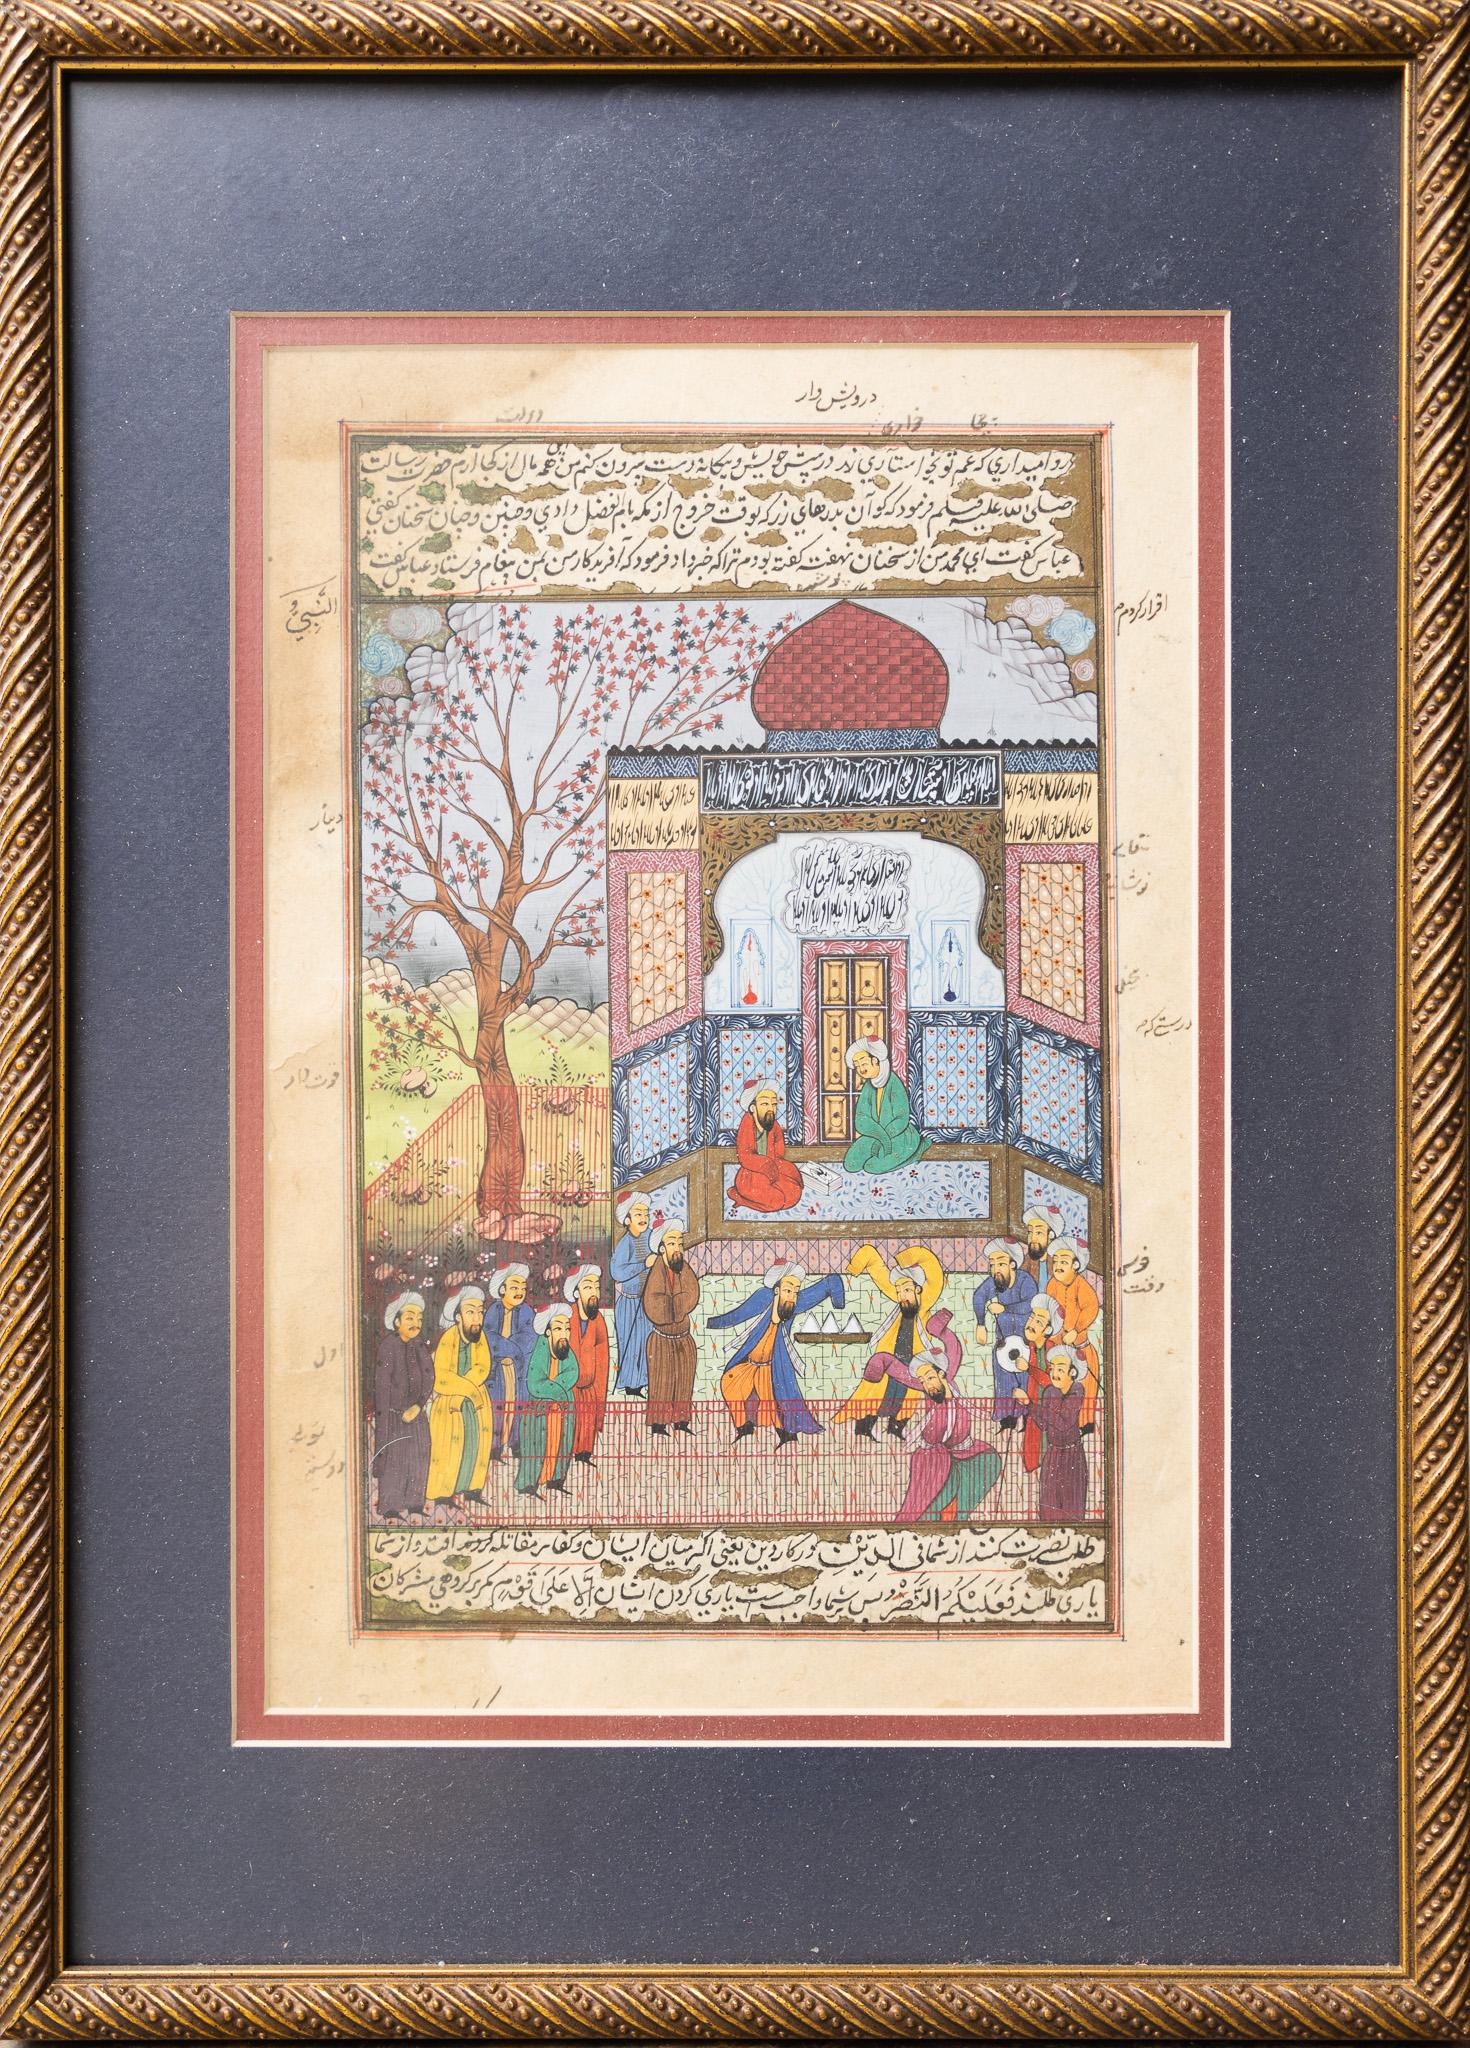 Illuminated Manuscript featuring a group scene of a crowd of men. A few of them dance in the middle of the crowd surrounded by spectators. Two men sitting in a stage structure watch from above.

Image Size: 11